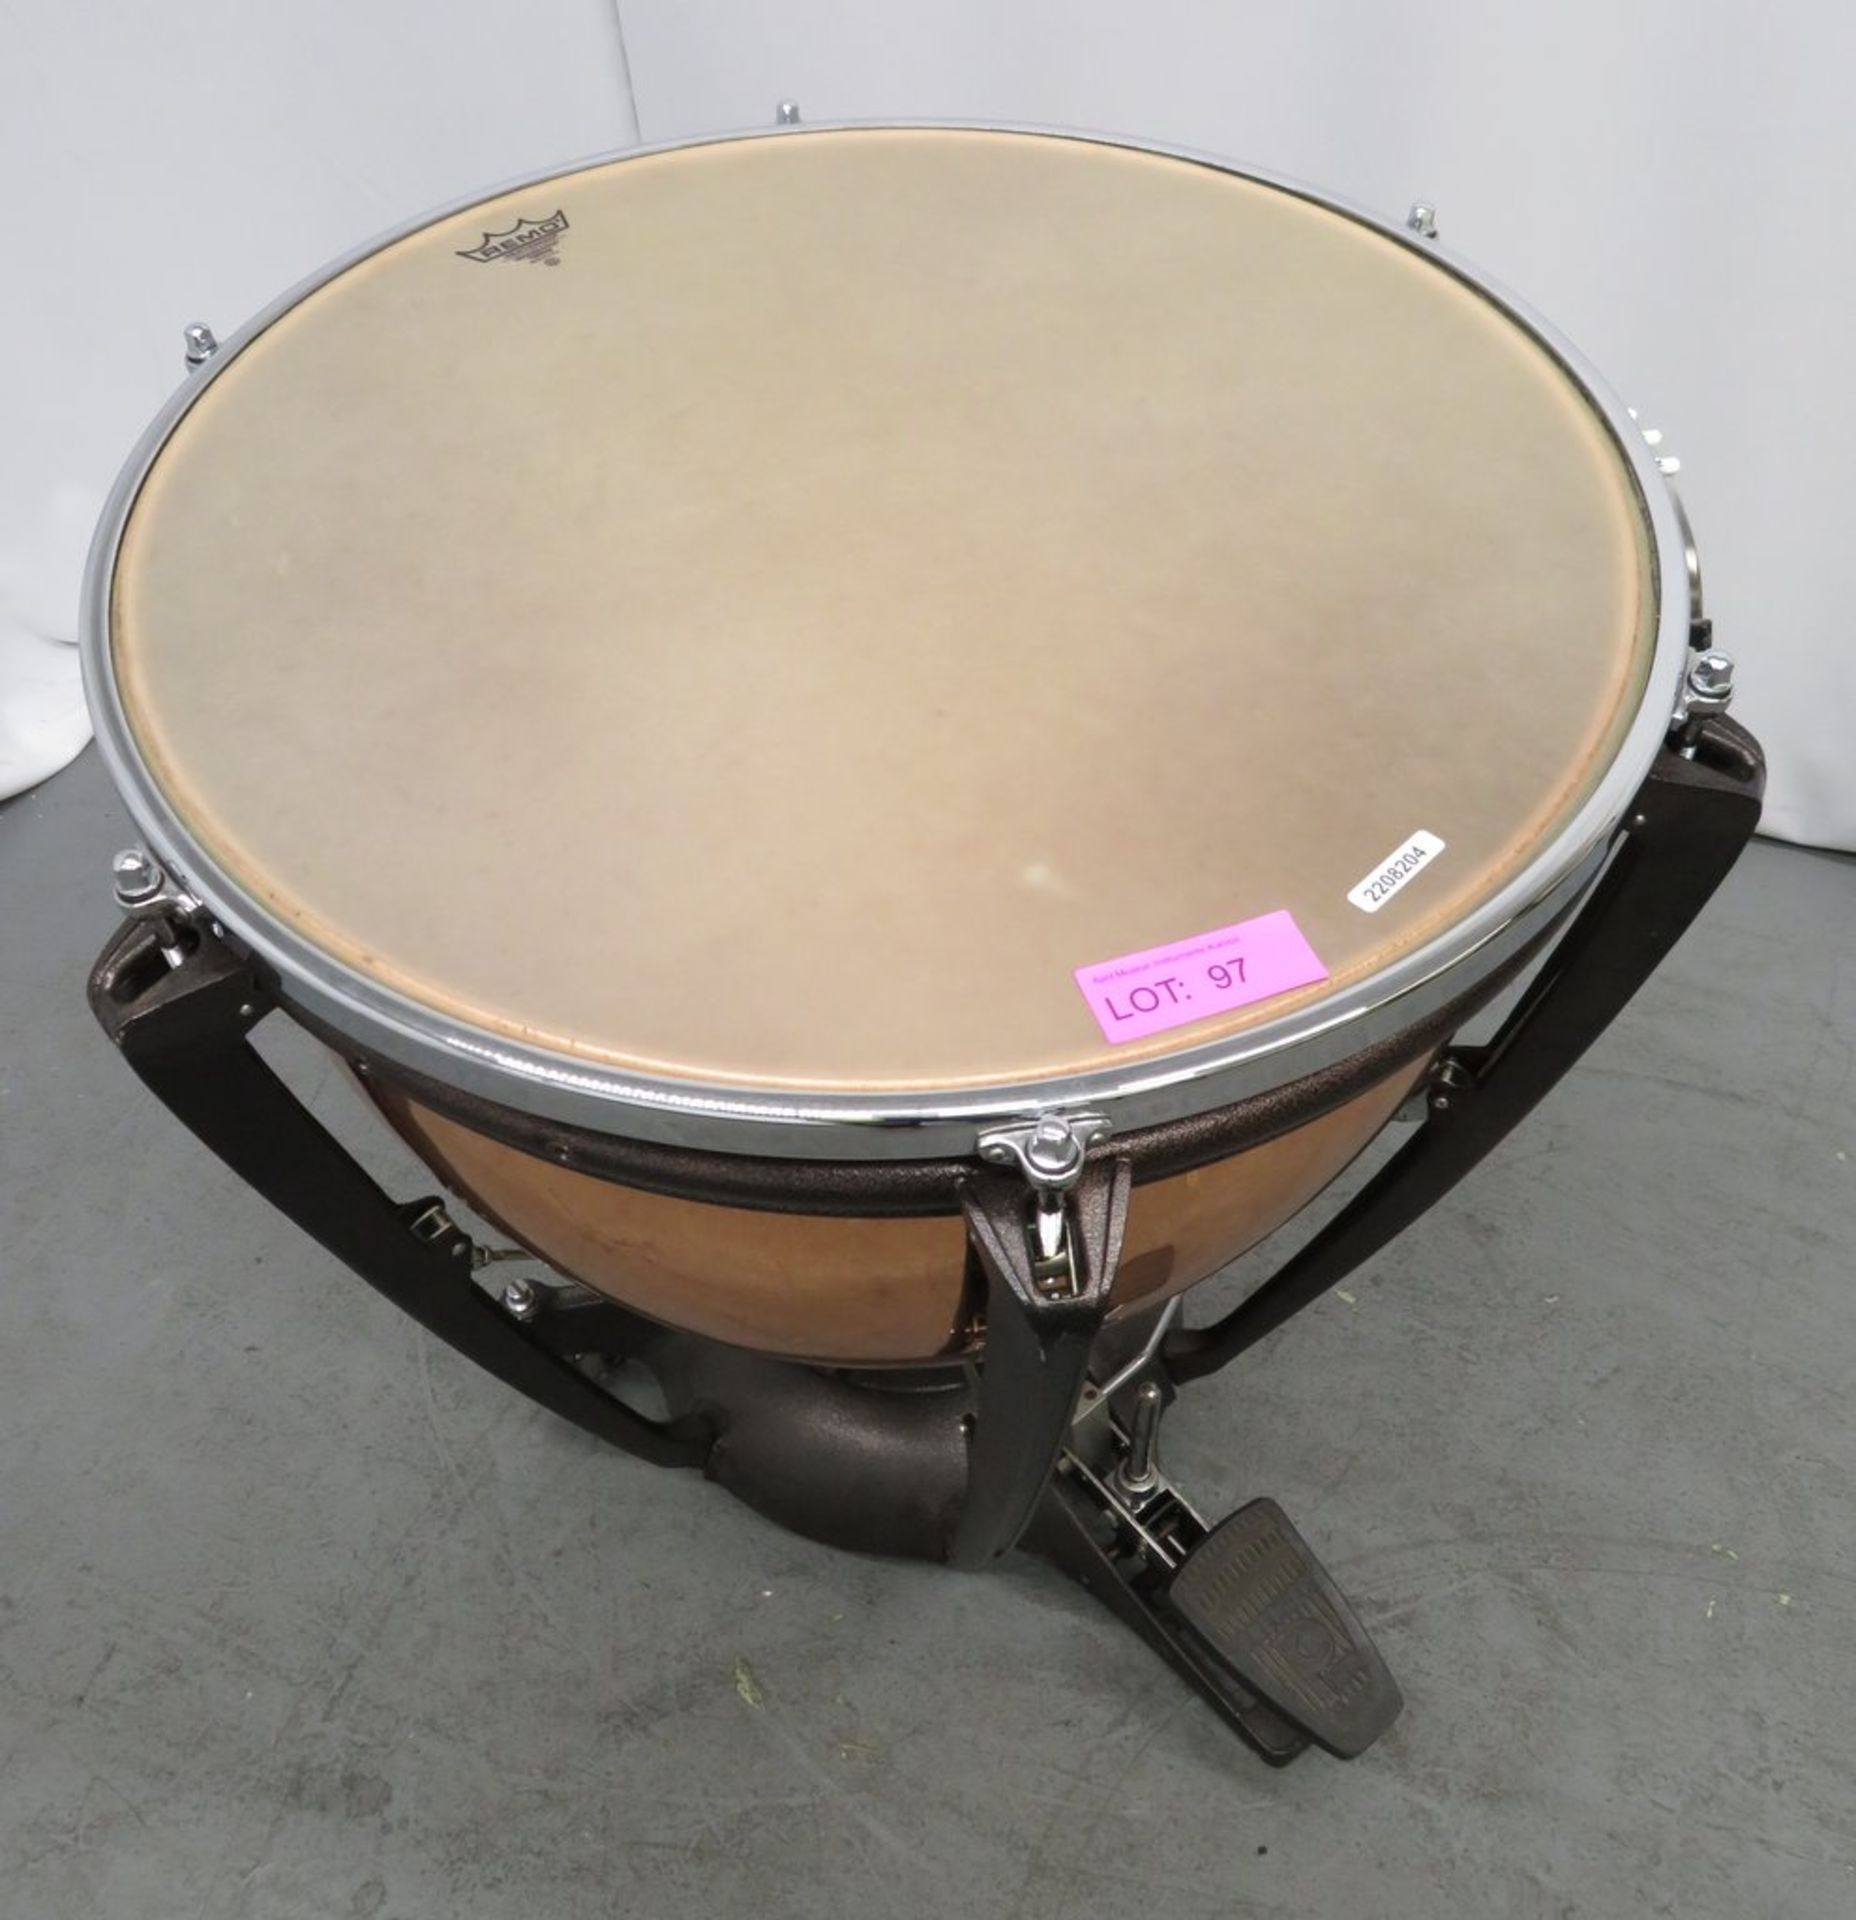 Premier 28"" Kettle Drum Complete With Padded Cover. - Image 2 of 6